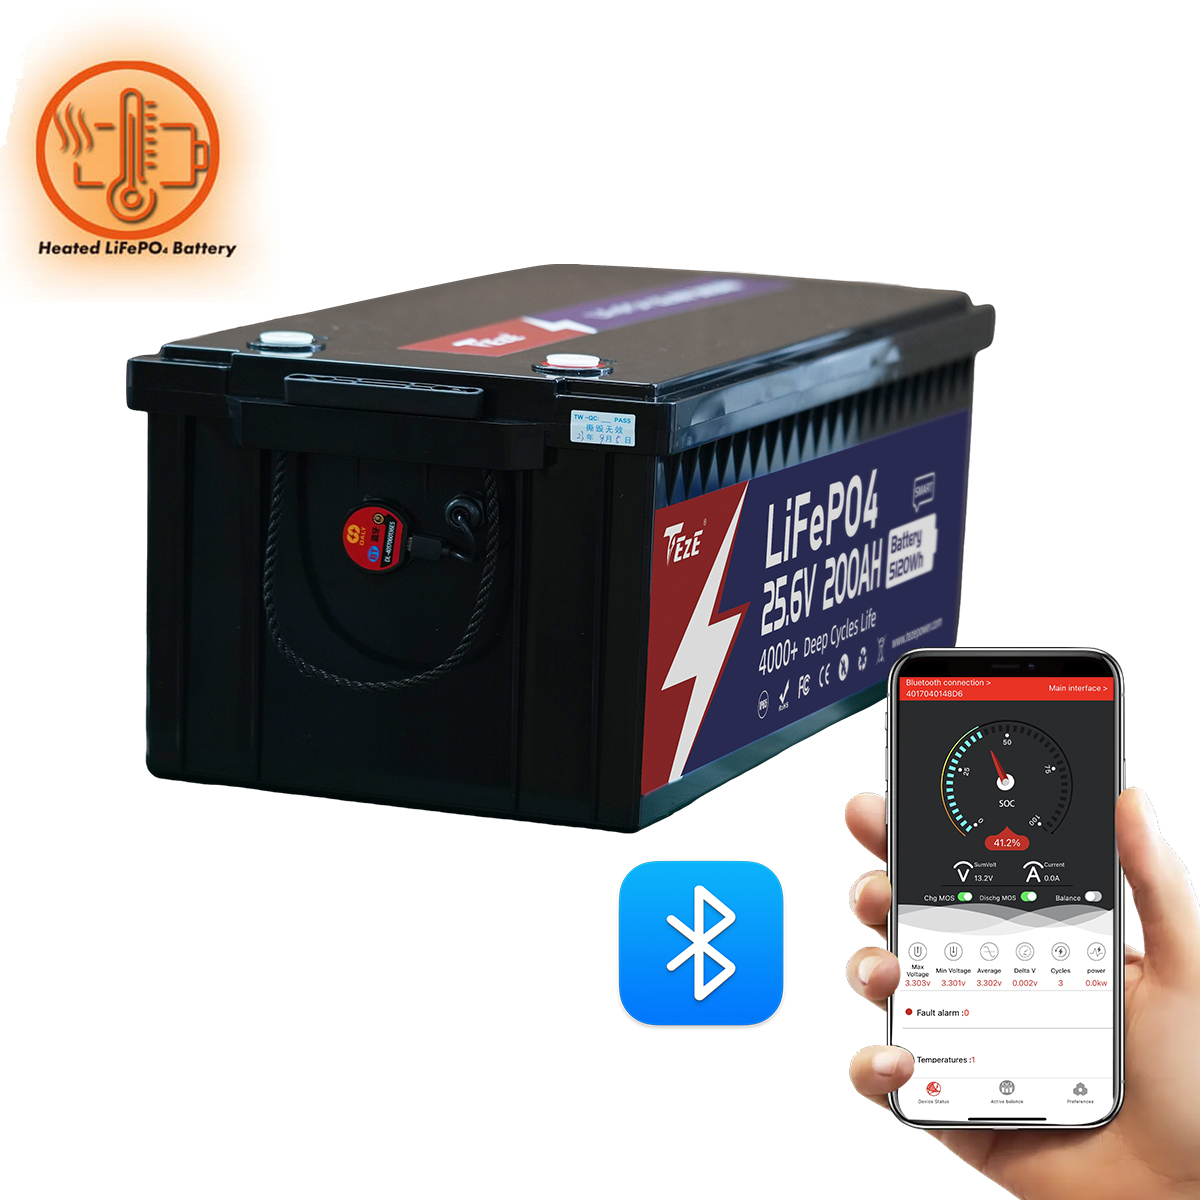 NEW-TezePower 24V200Ah LiFePO4 Battery with Bluetooth, Self-heating and Active Balancer, Built-in 200A Daly BMS (Bluetooth External Version)-TezePower